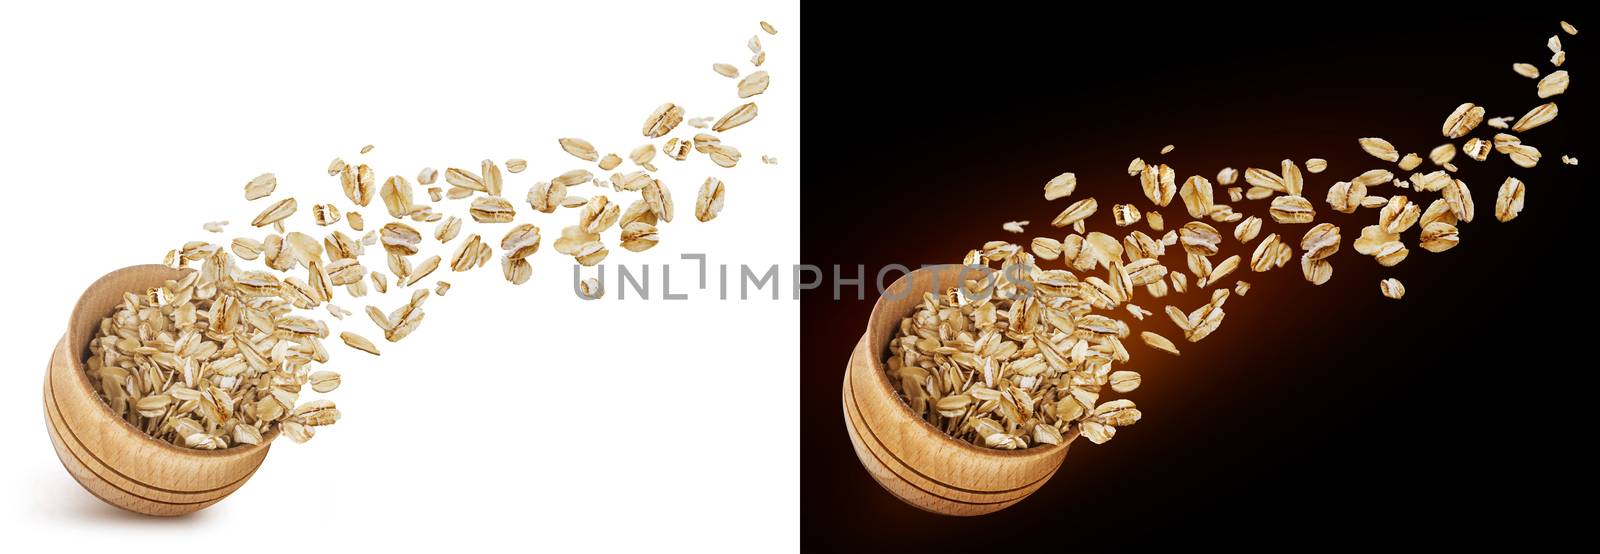 Oat flakes flying out of wooden bowl isolated on white and black background by xamtiw